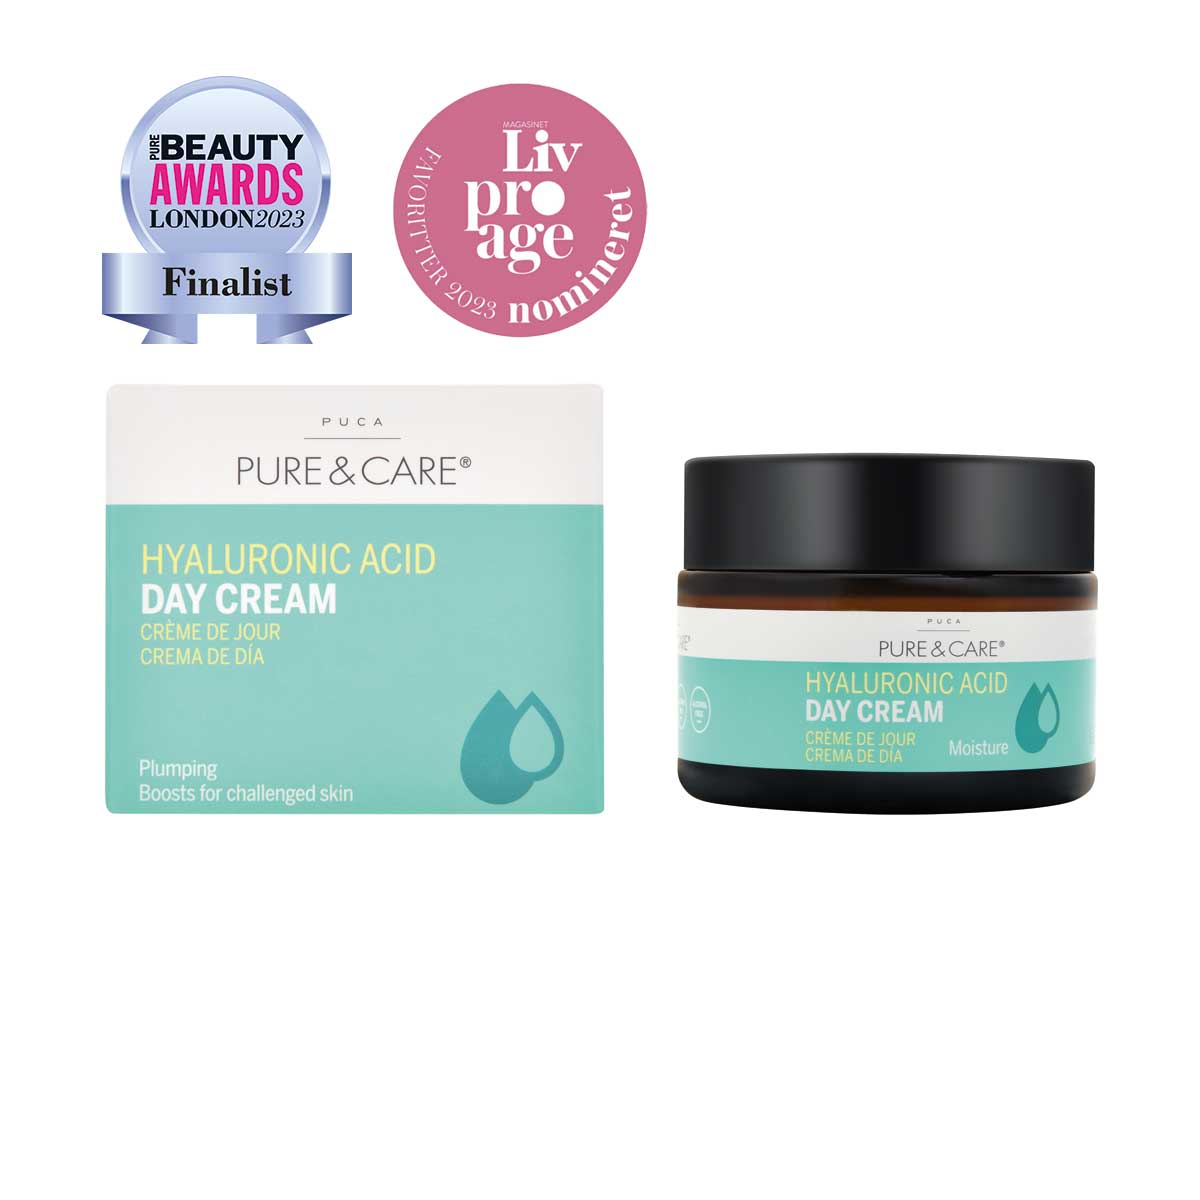 Hyaluronic Acid Day Cream | PUCA - PURE & CARE